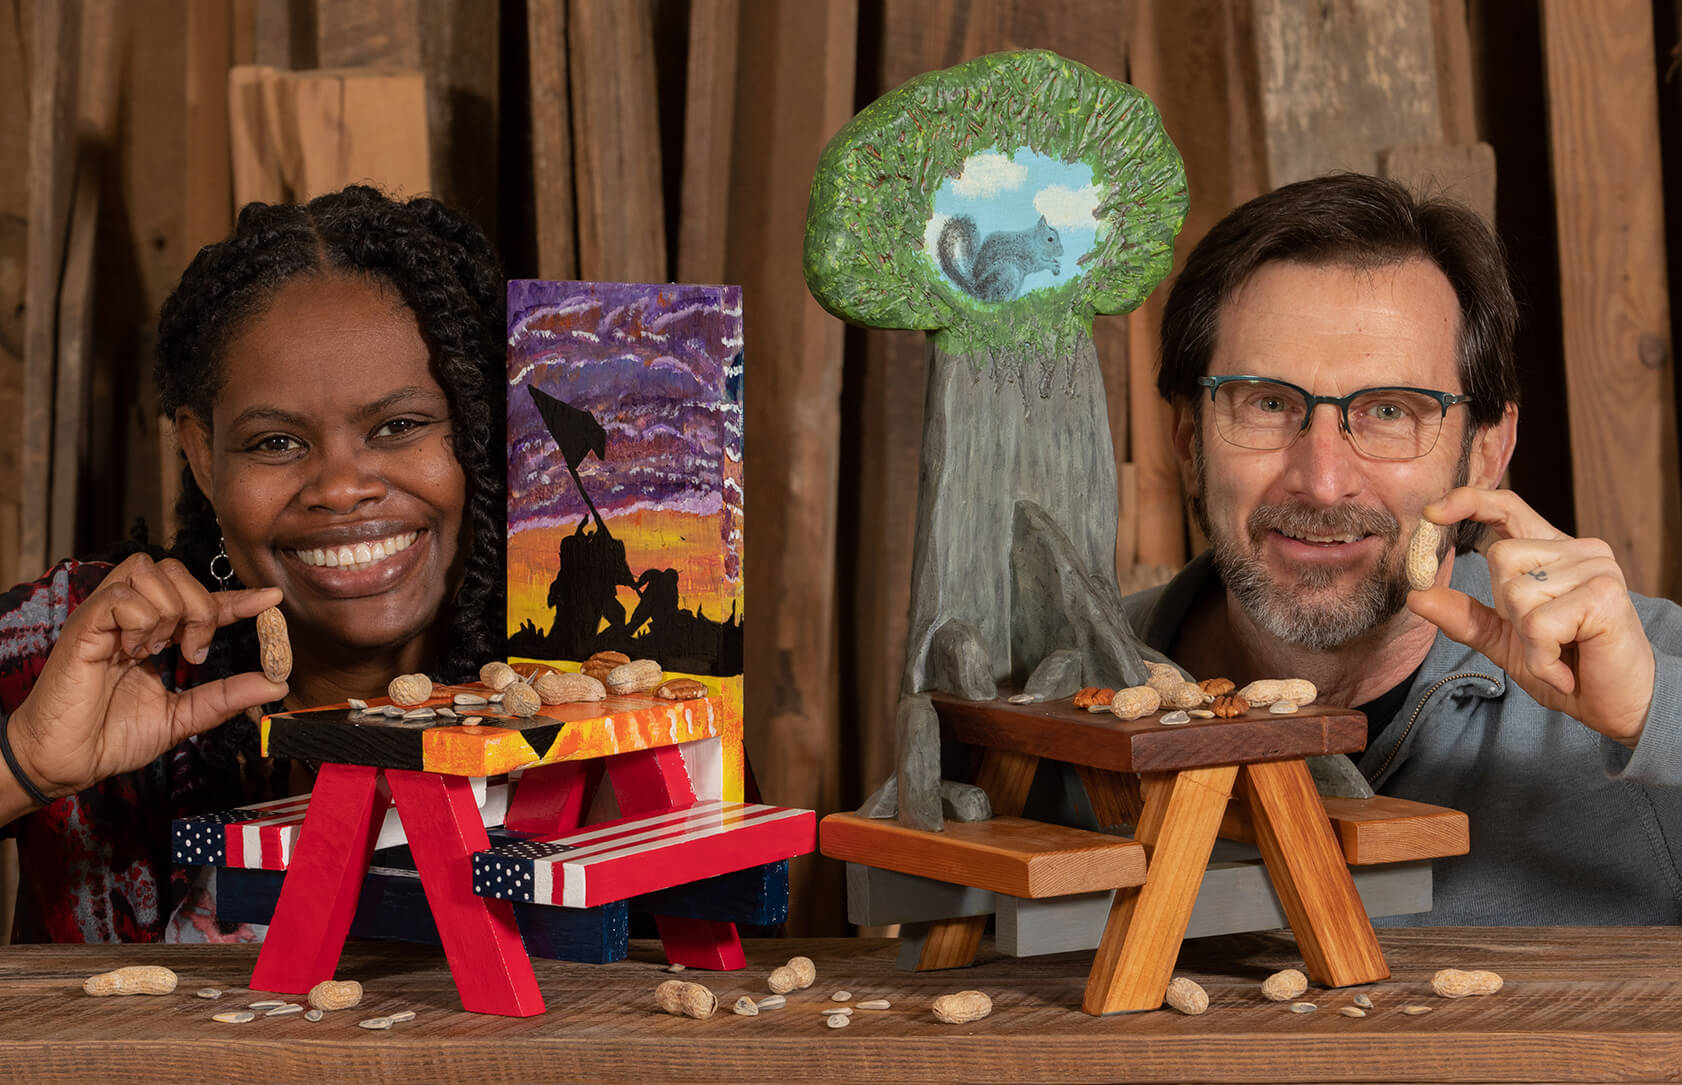 two people hold peanuts and pose behind small painted picnic tables